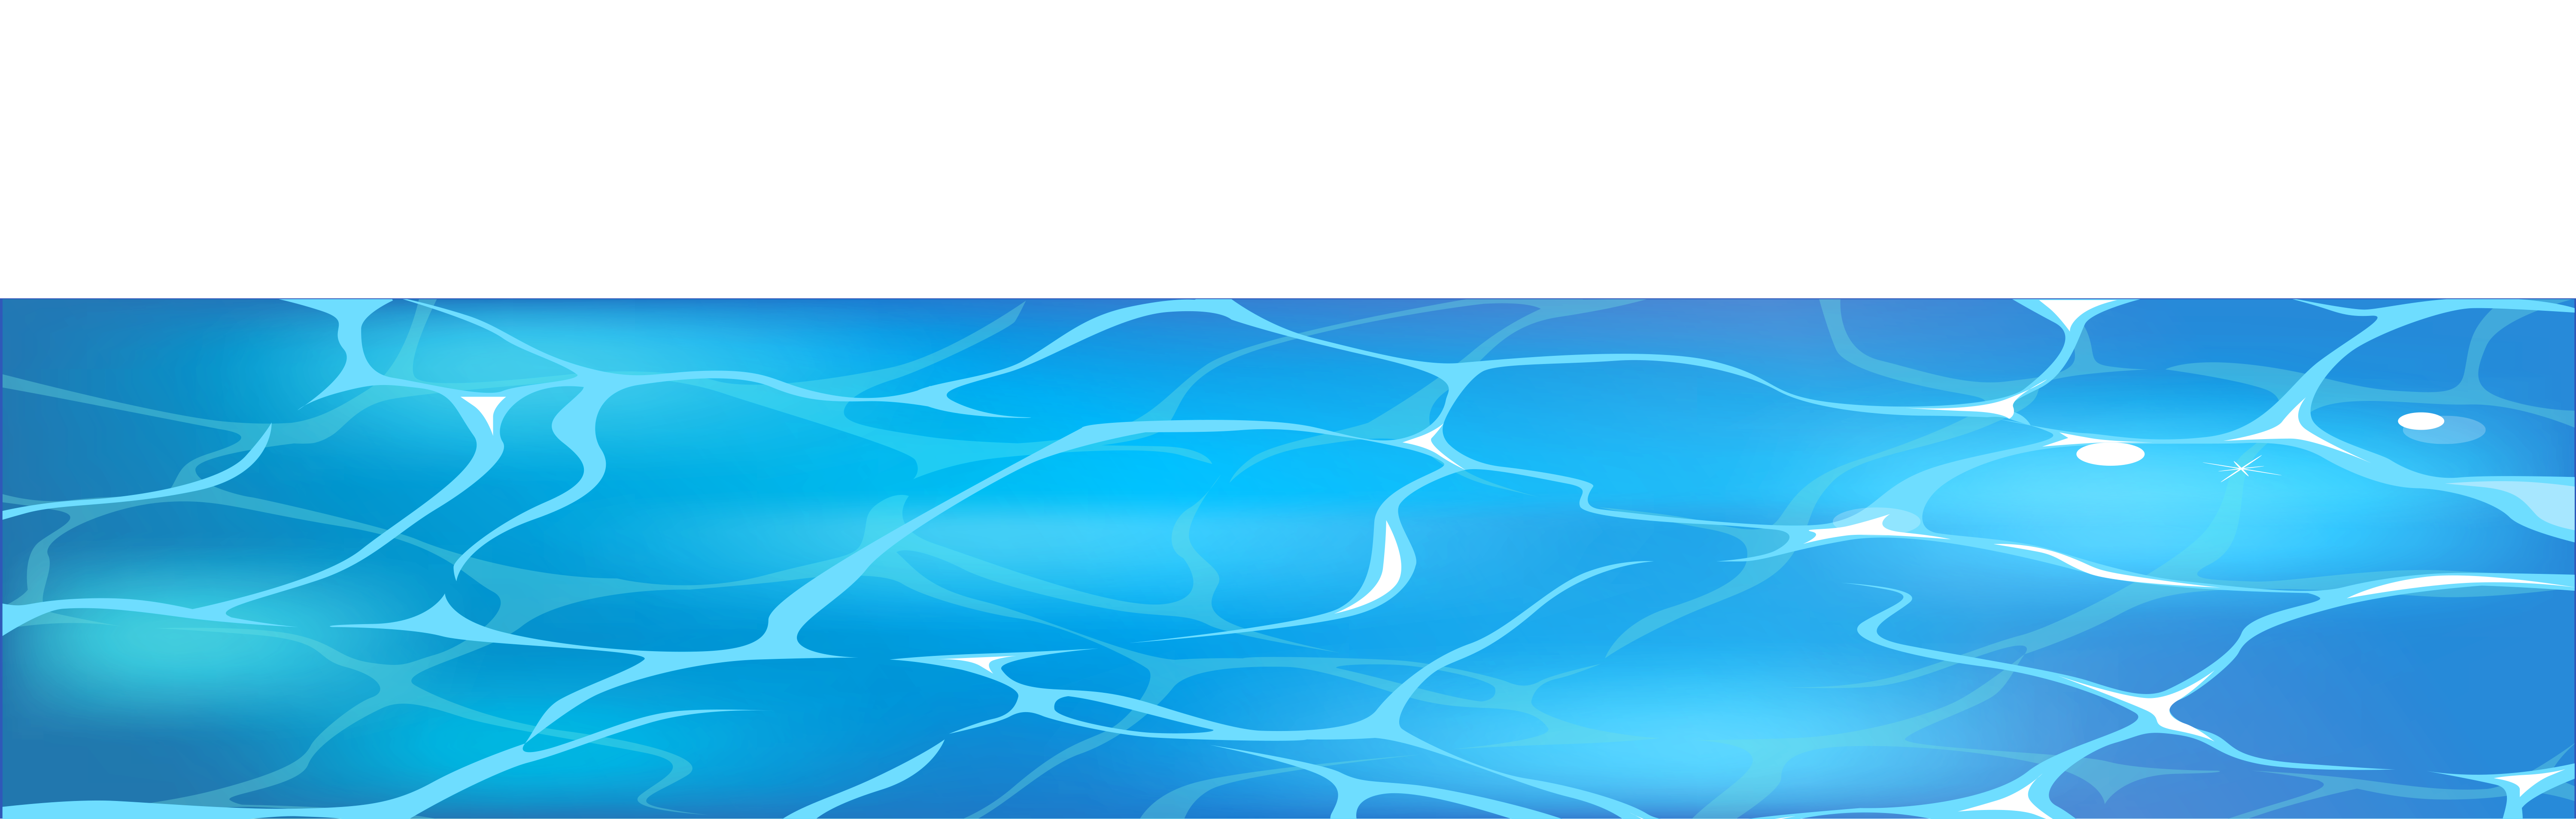 water background clipart - photo #35